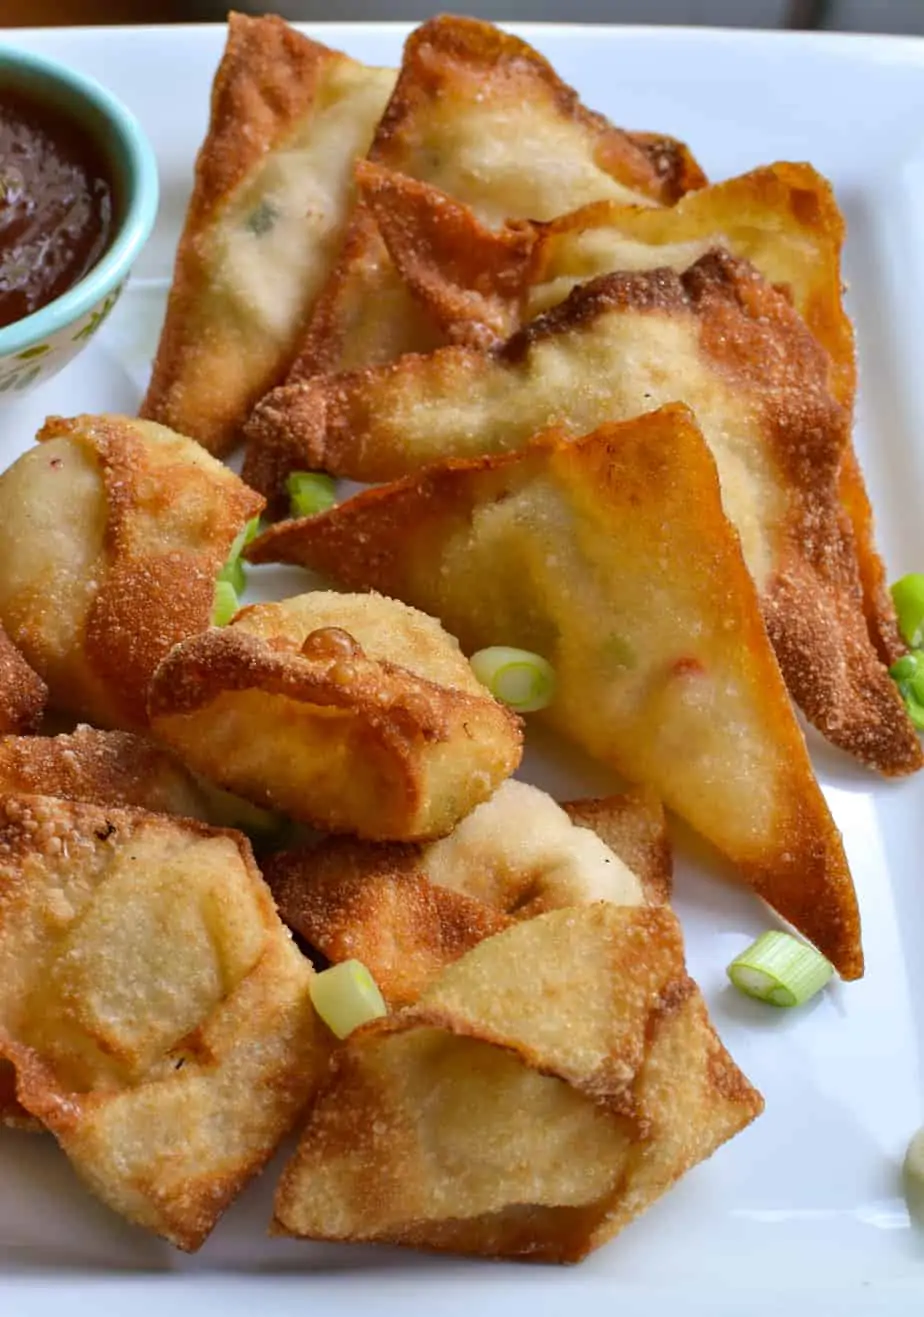 These Crab Rangoon are delectable crispy fried wontons stuffed with cream cheese and crab meat. 